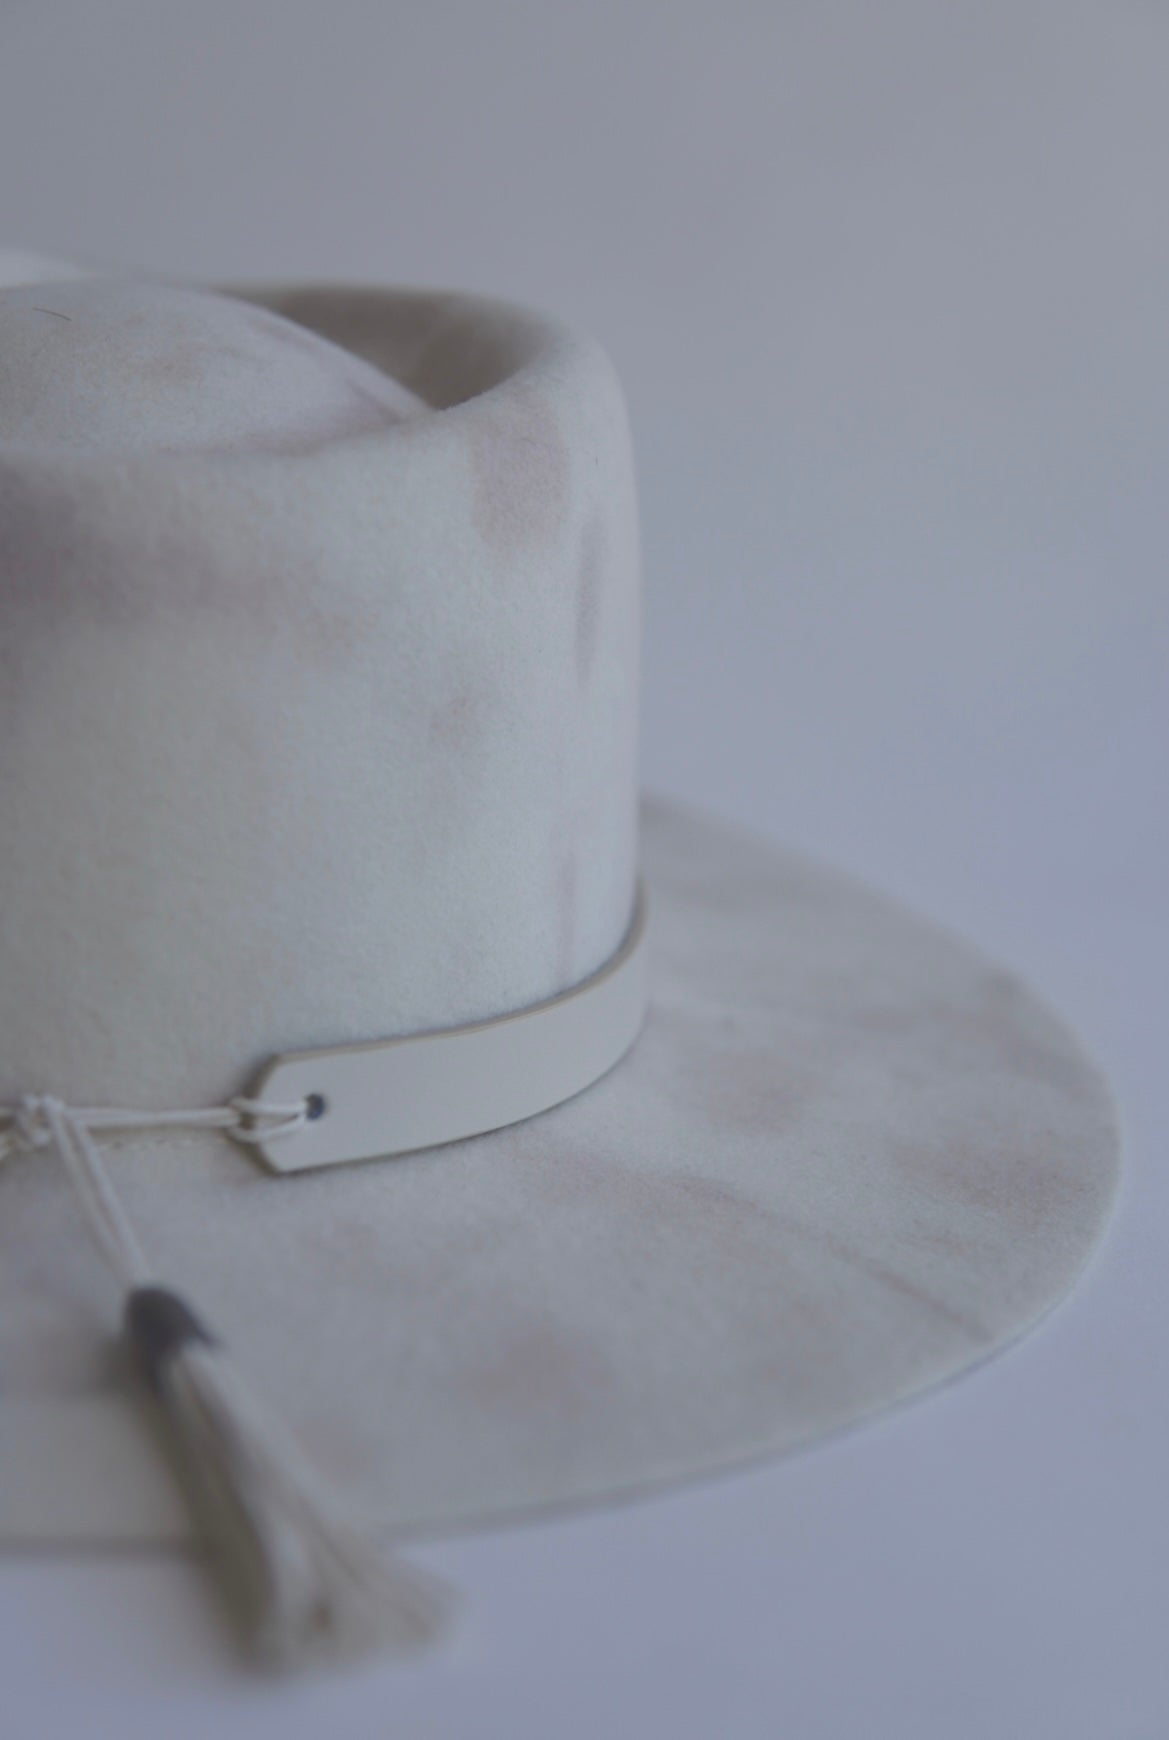 Bohemian Band leather hat band - Augustine Hat Co. Leather hat band, hat accessory 